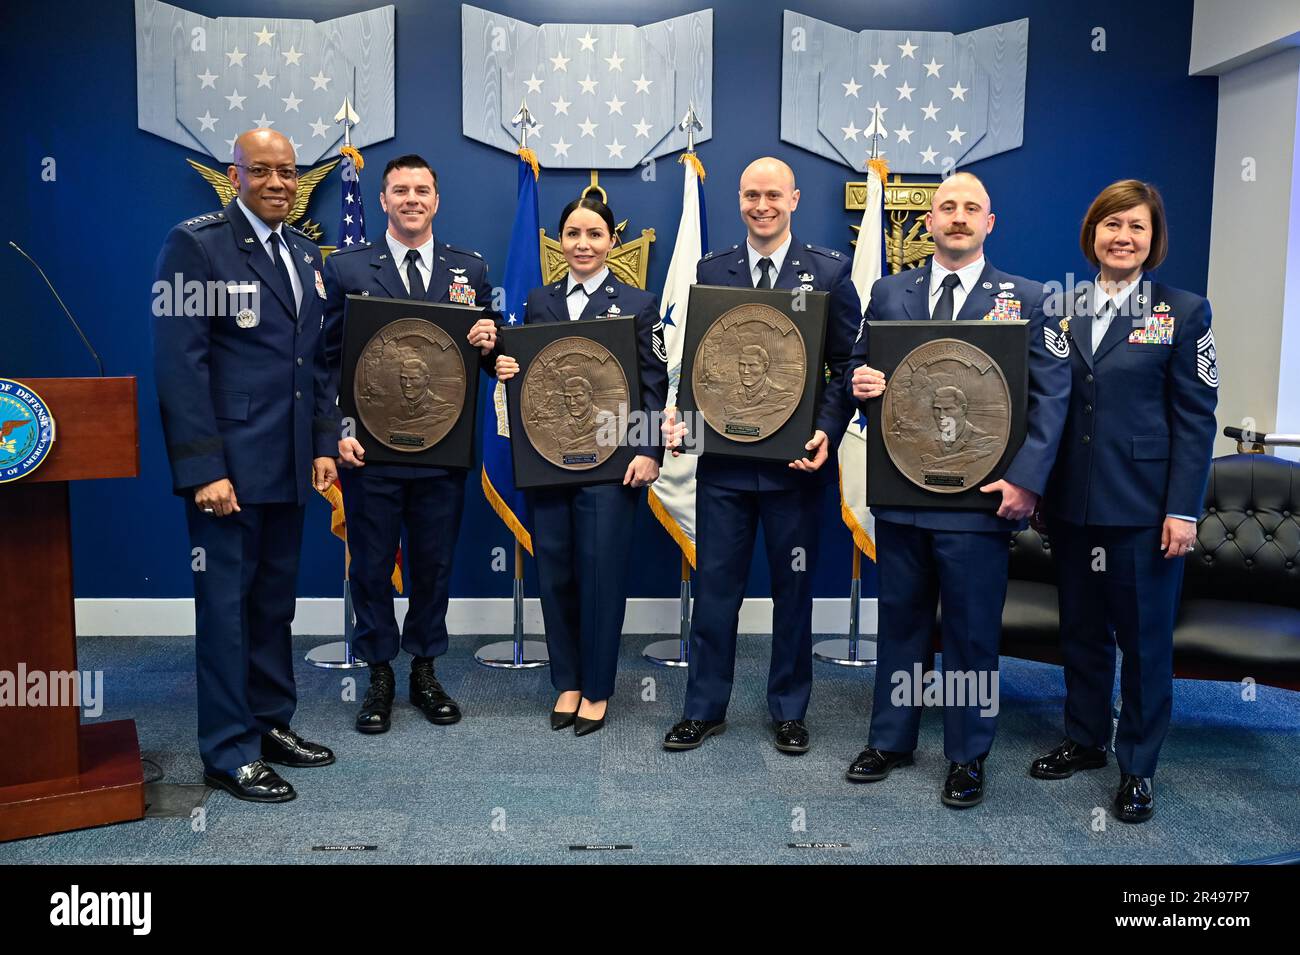 Air Force Chief of Staff Gen. CQ Brown, Jr. and Chief Master Sgt. of the Air Force JoAnne S. Bass pose with Lt. Col. Morgan Laird, second from left, Senior Master Sgt. Karla Pelayo, Capt. Christopher Locke and Tech. Sgt. Connor Hamilton, recipients of the 2022 Lance P. Sijan USAF Leadership Awards, during a ceremony at the Pentagon, Arlington, Va., April 3, 2023. The award is named for Medal of Honor recipient Capt. Lance Sijan, who died while being held as a prisoner of war during the Vietnam War. Stock Photo